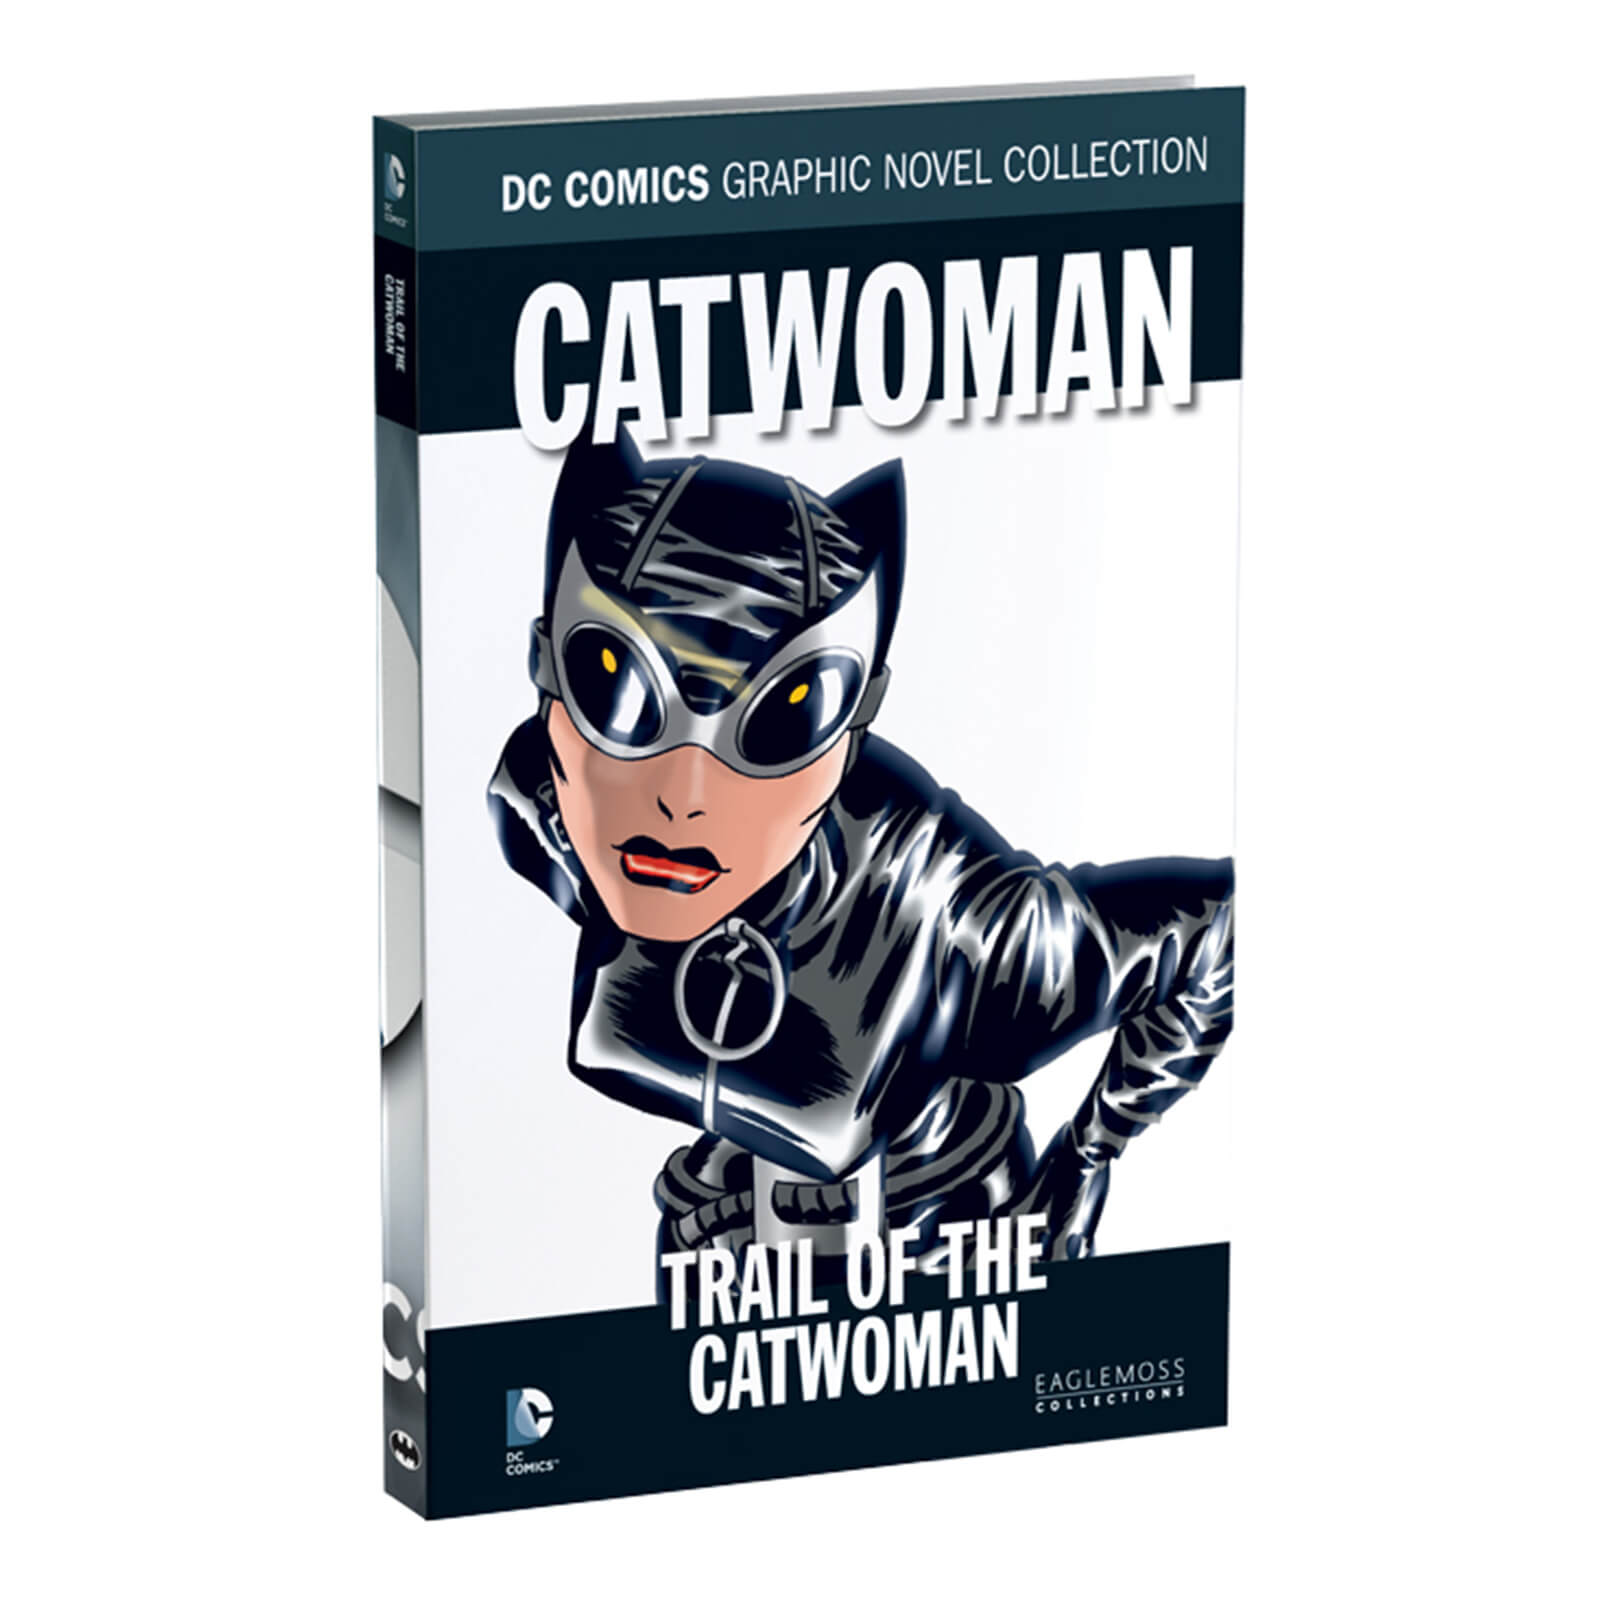 DC Comics Graphic Novel Collection - Catwoman: The Trail of Catwoman - Volume 36